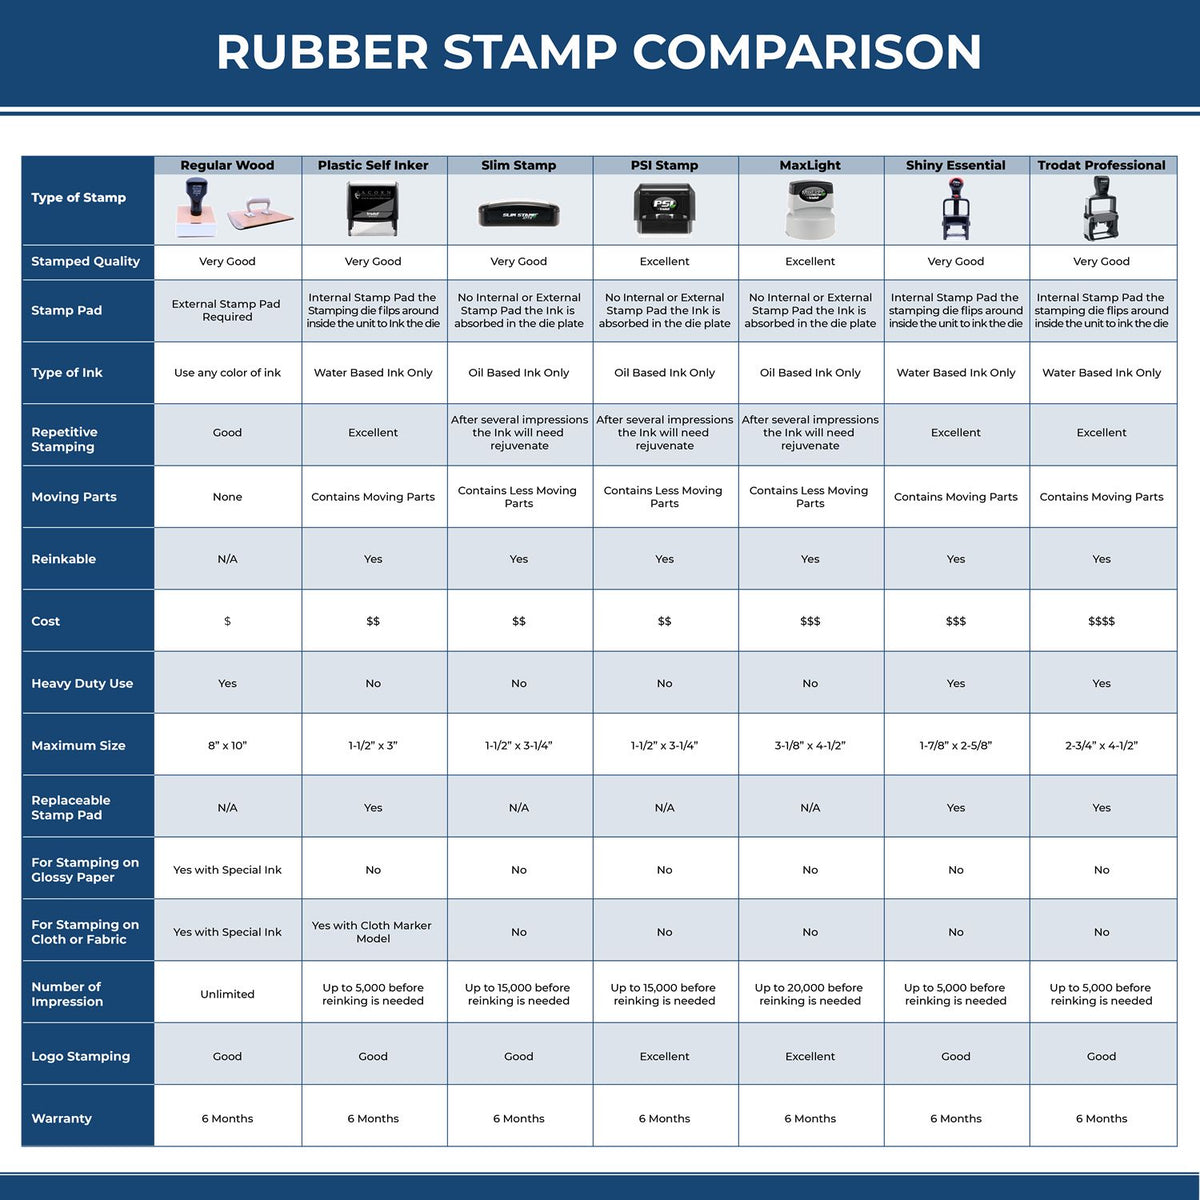 Large Self-Inking Narrow Font Cancelled Stamp 4889S Rubber Stamp Comparison